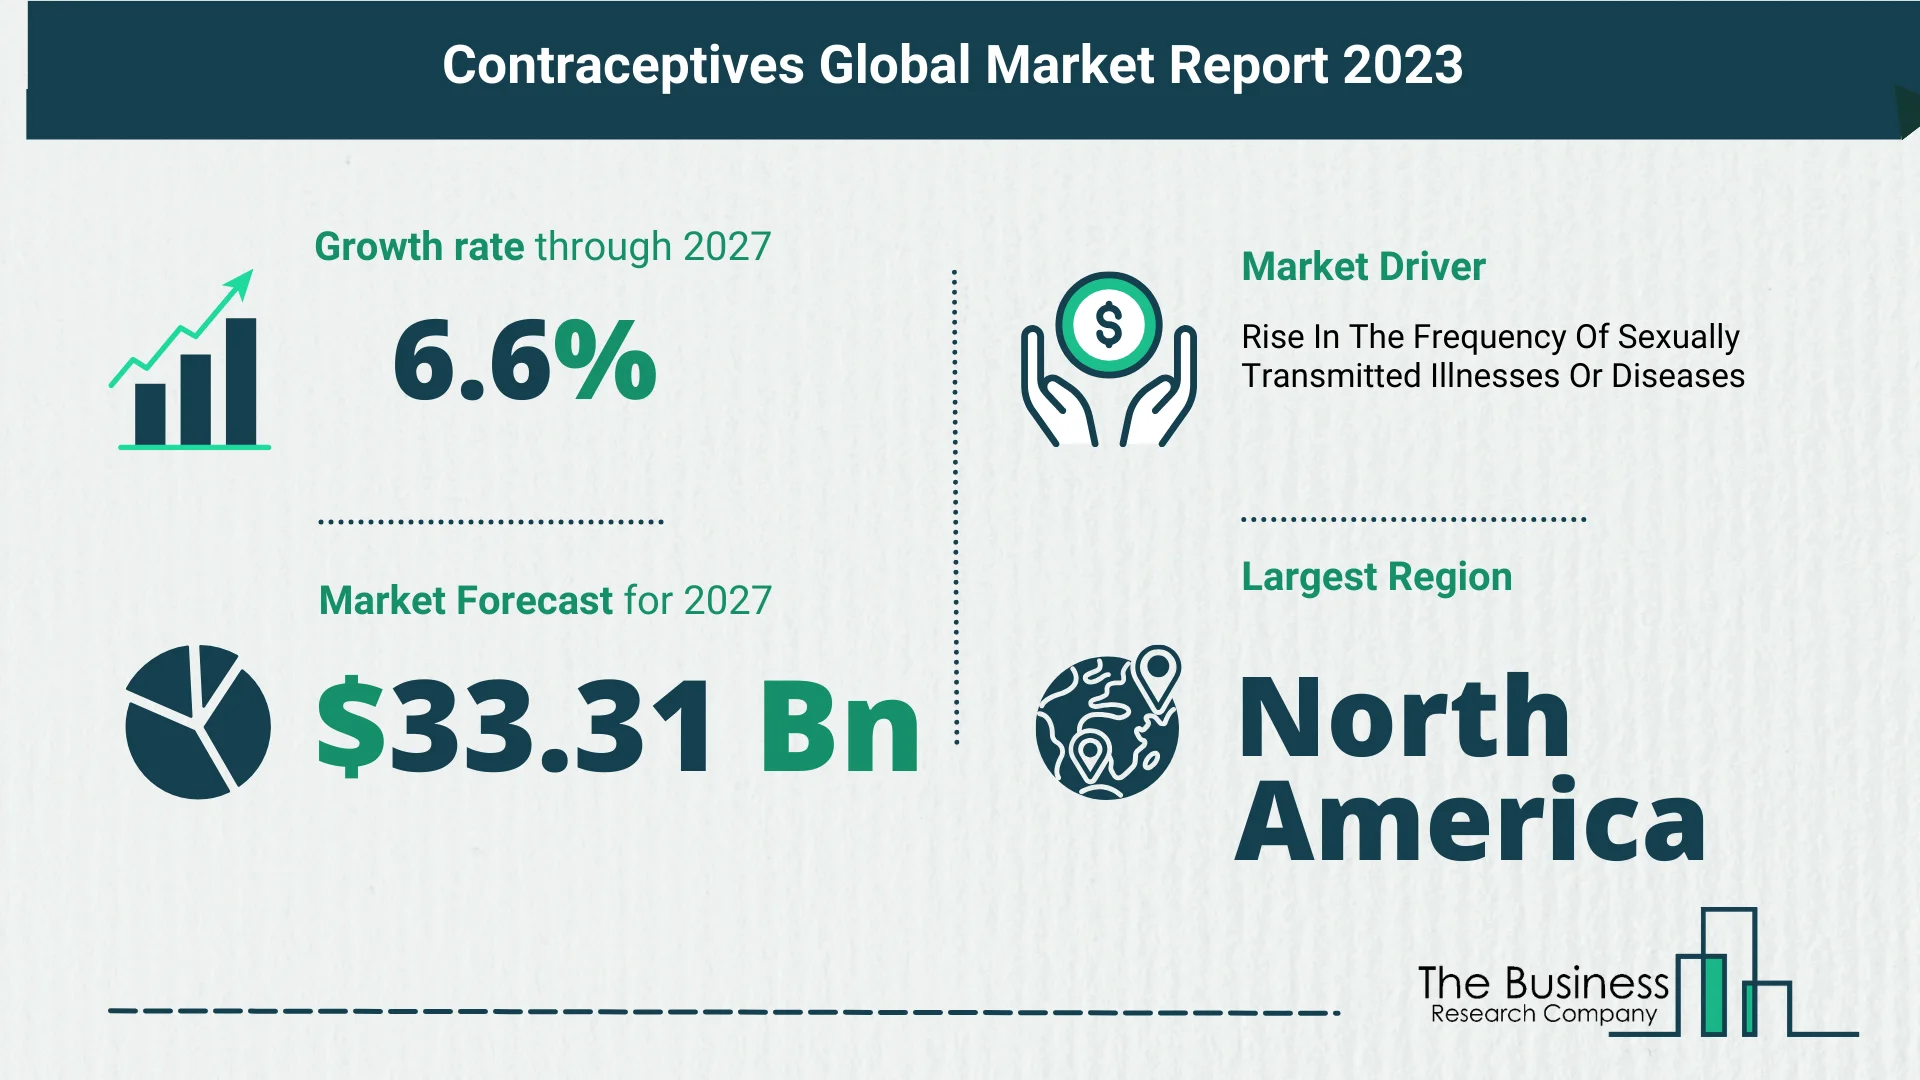 Global Contraceptives Market Size